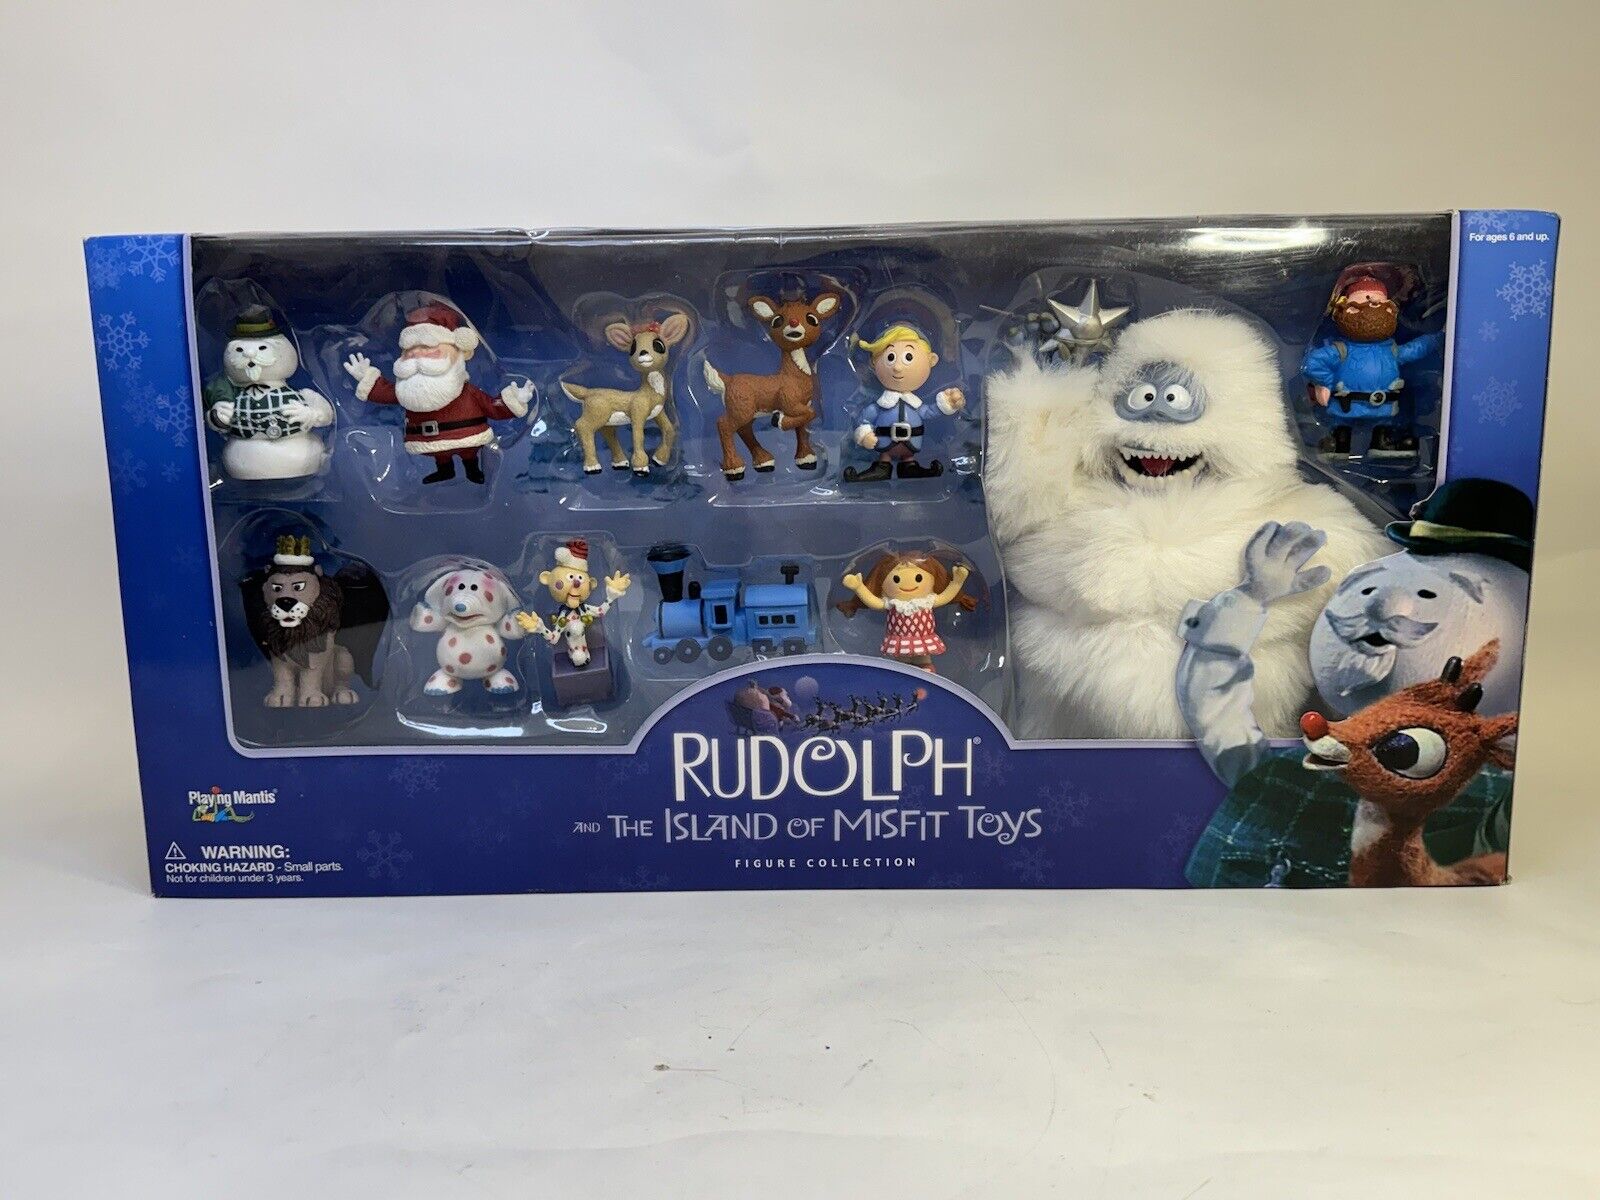 NEW RUDOLPH AND THE ISLAND OF MISFIT TOYS FIGURE COLLECTION LIMITED 2001